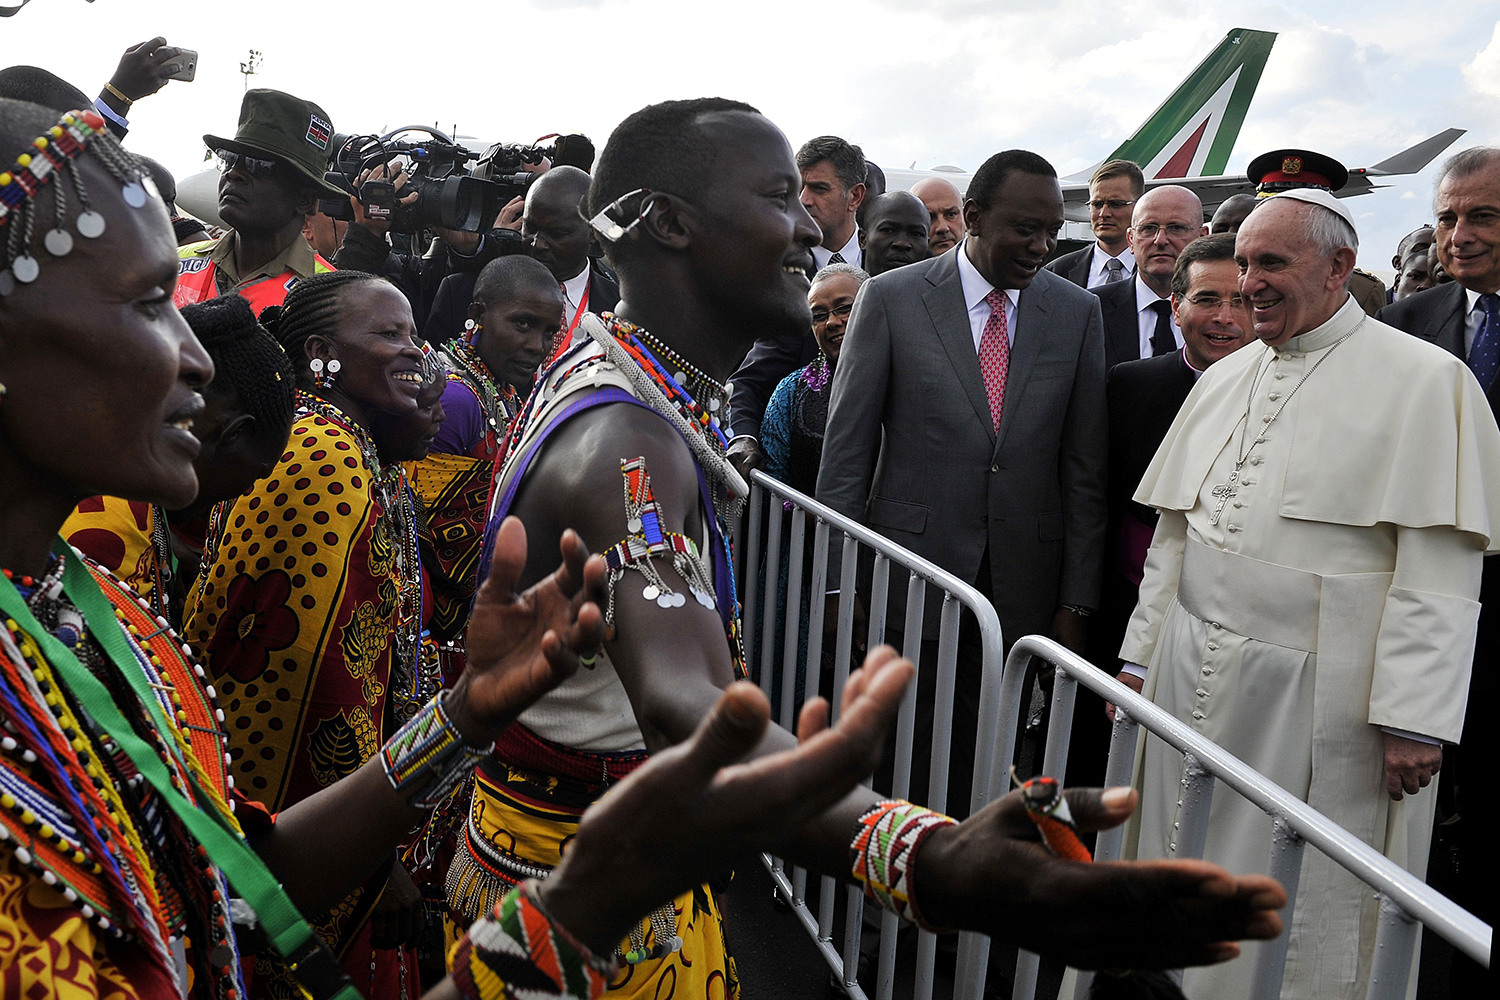 Pope Francis watches traditional dancers after he arrived at the Jommo Kenyatta International airport in Nairobi on Nov. 25, 2015.